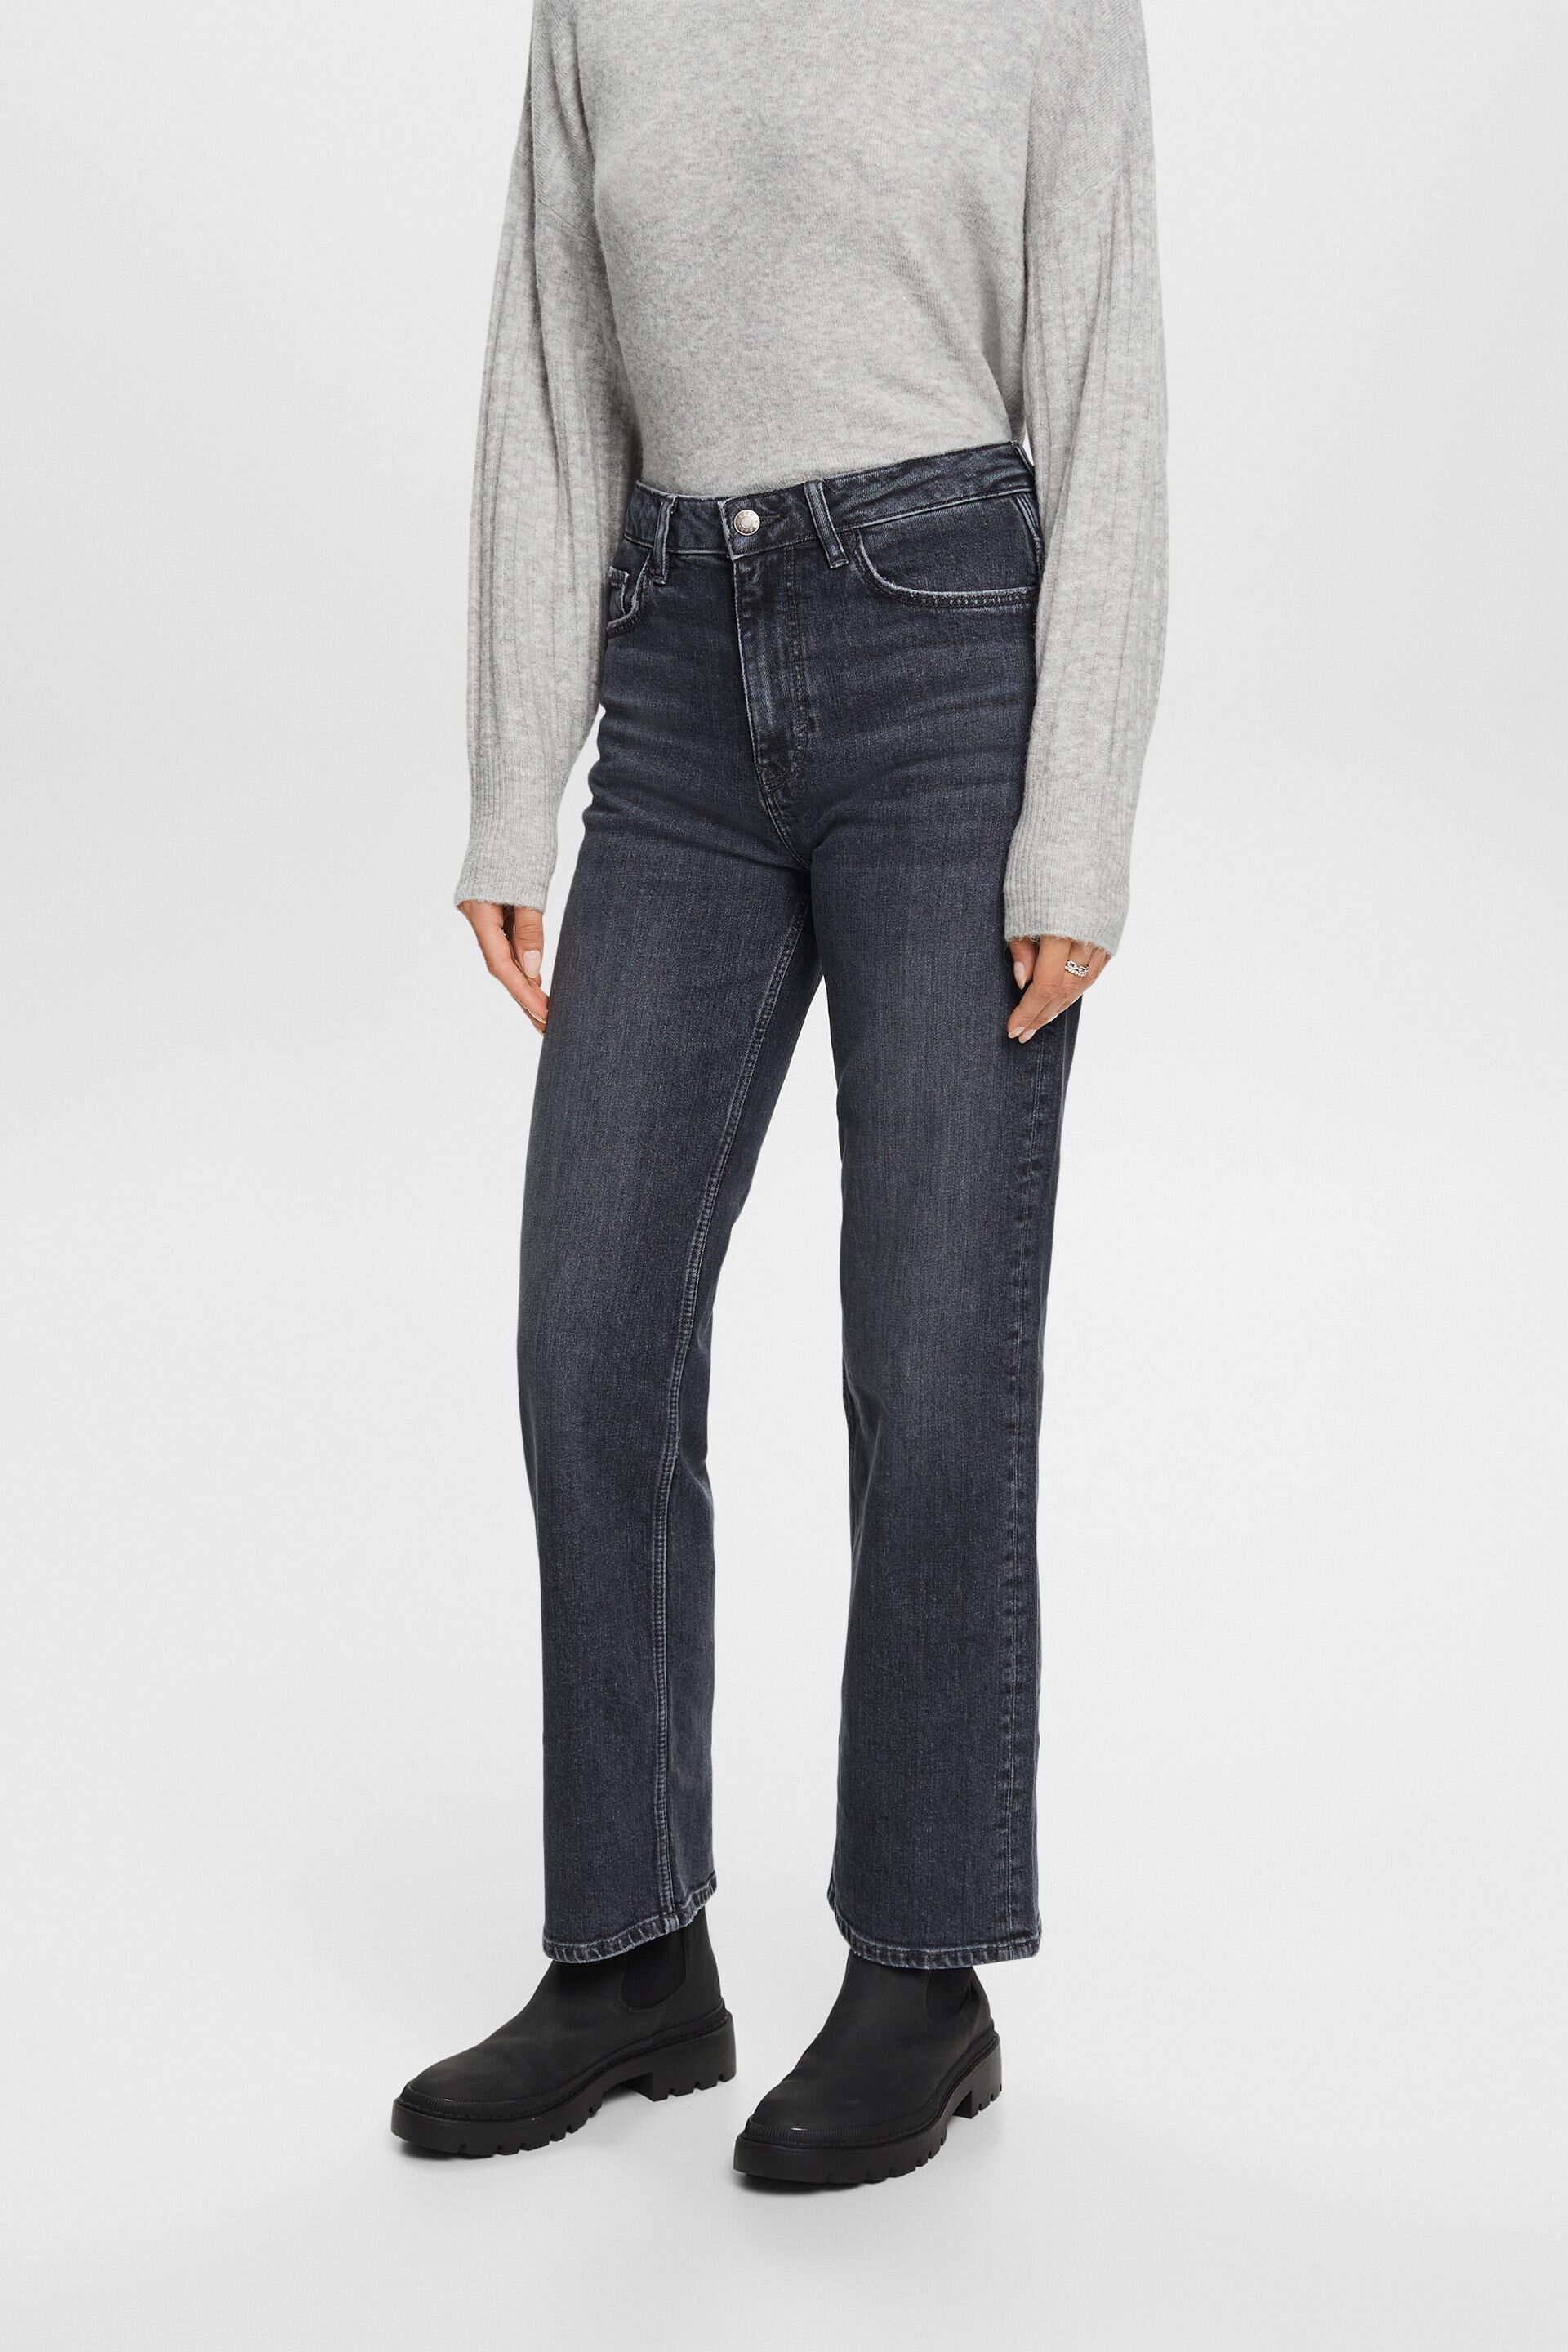 Esprit fit 80's straight length jeans Ankle